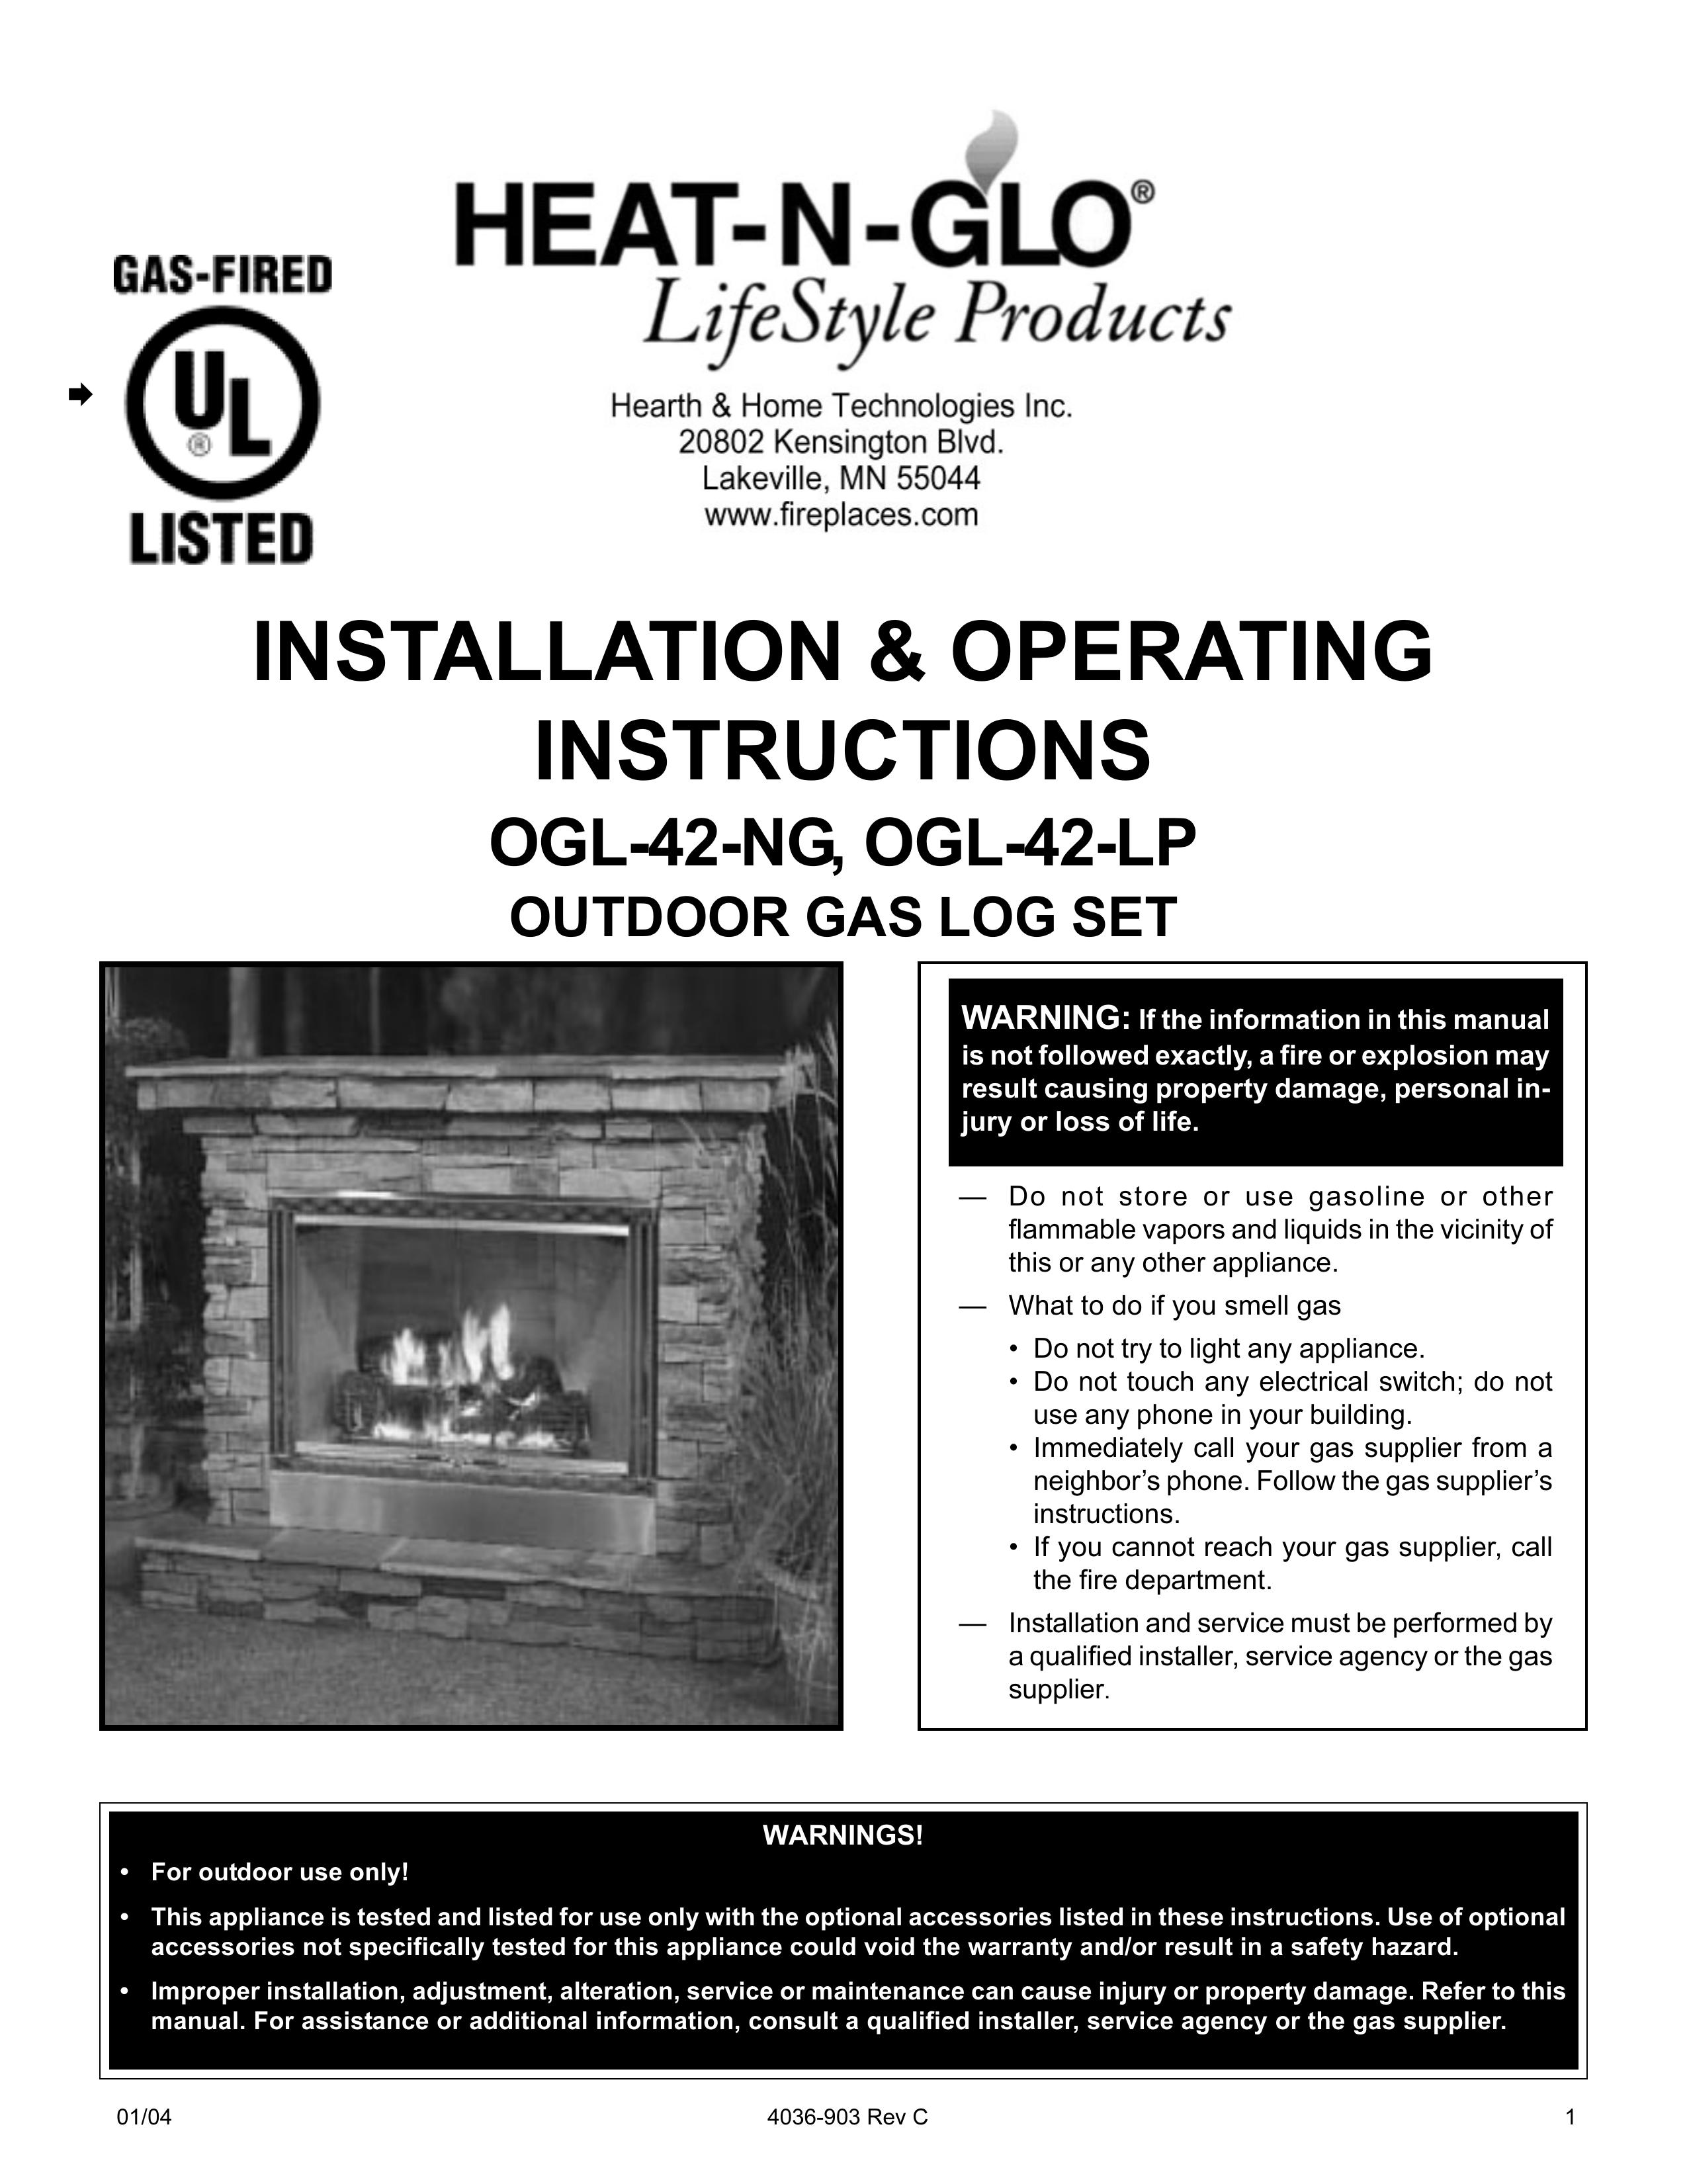 Heat & Glo LifeStyle OGL-42-LP Outdoor Fireplace User Manual